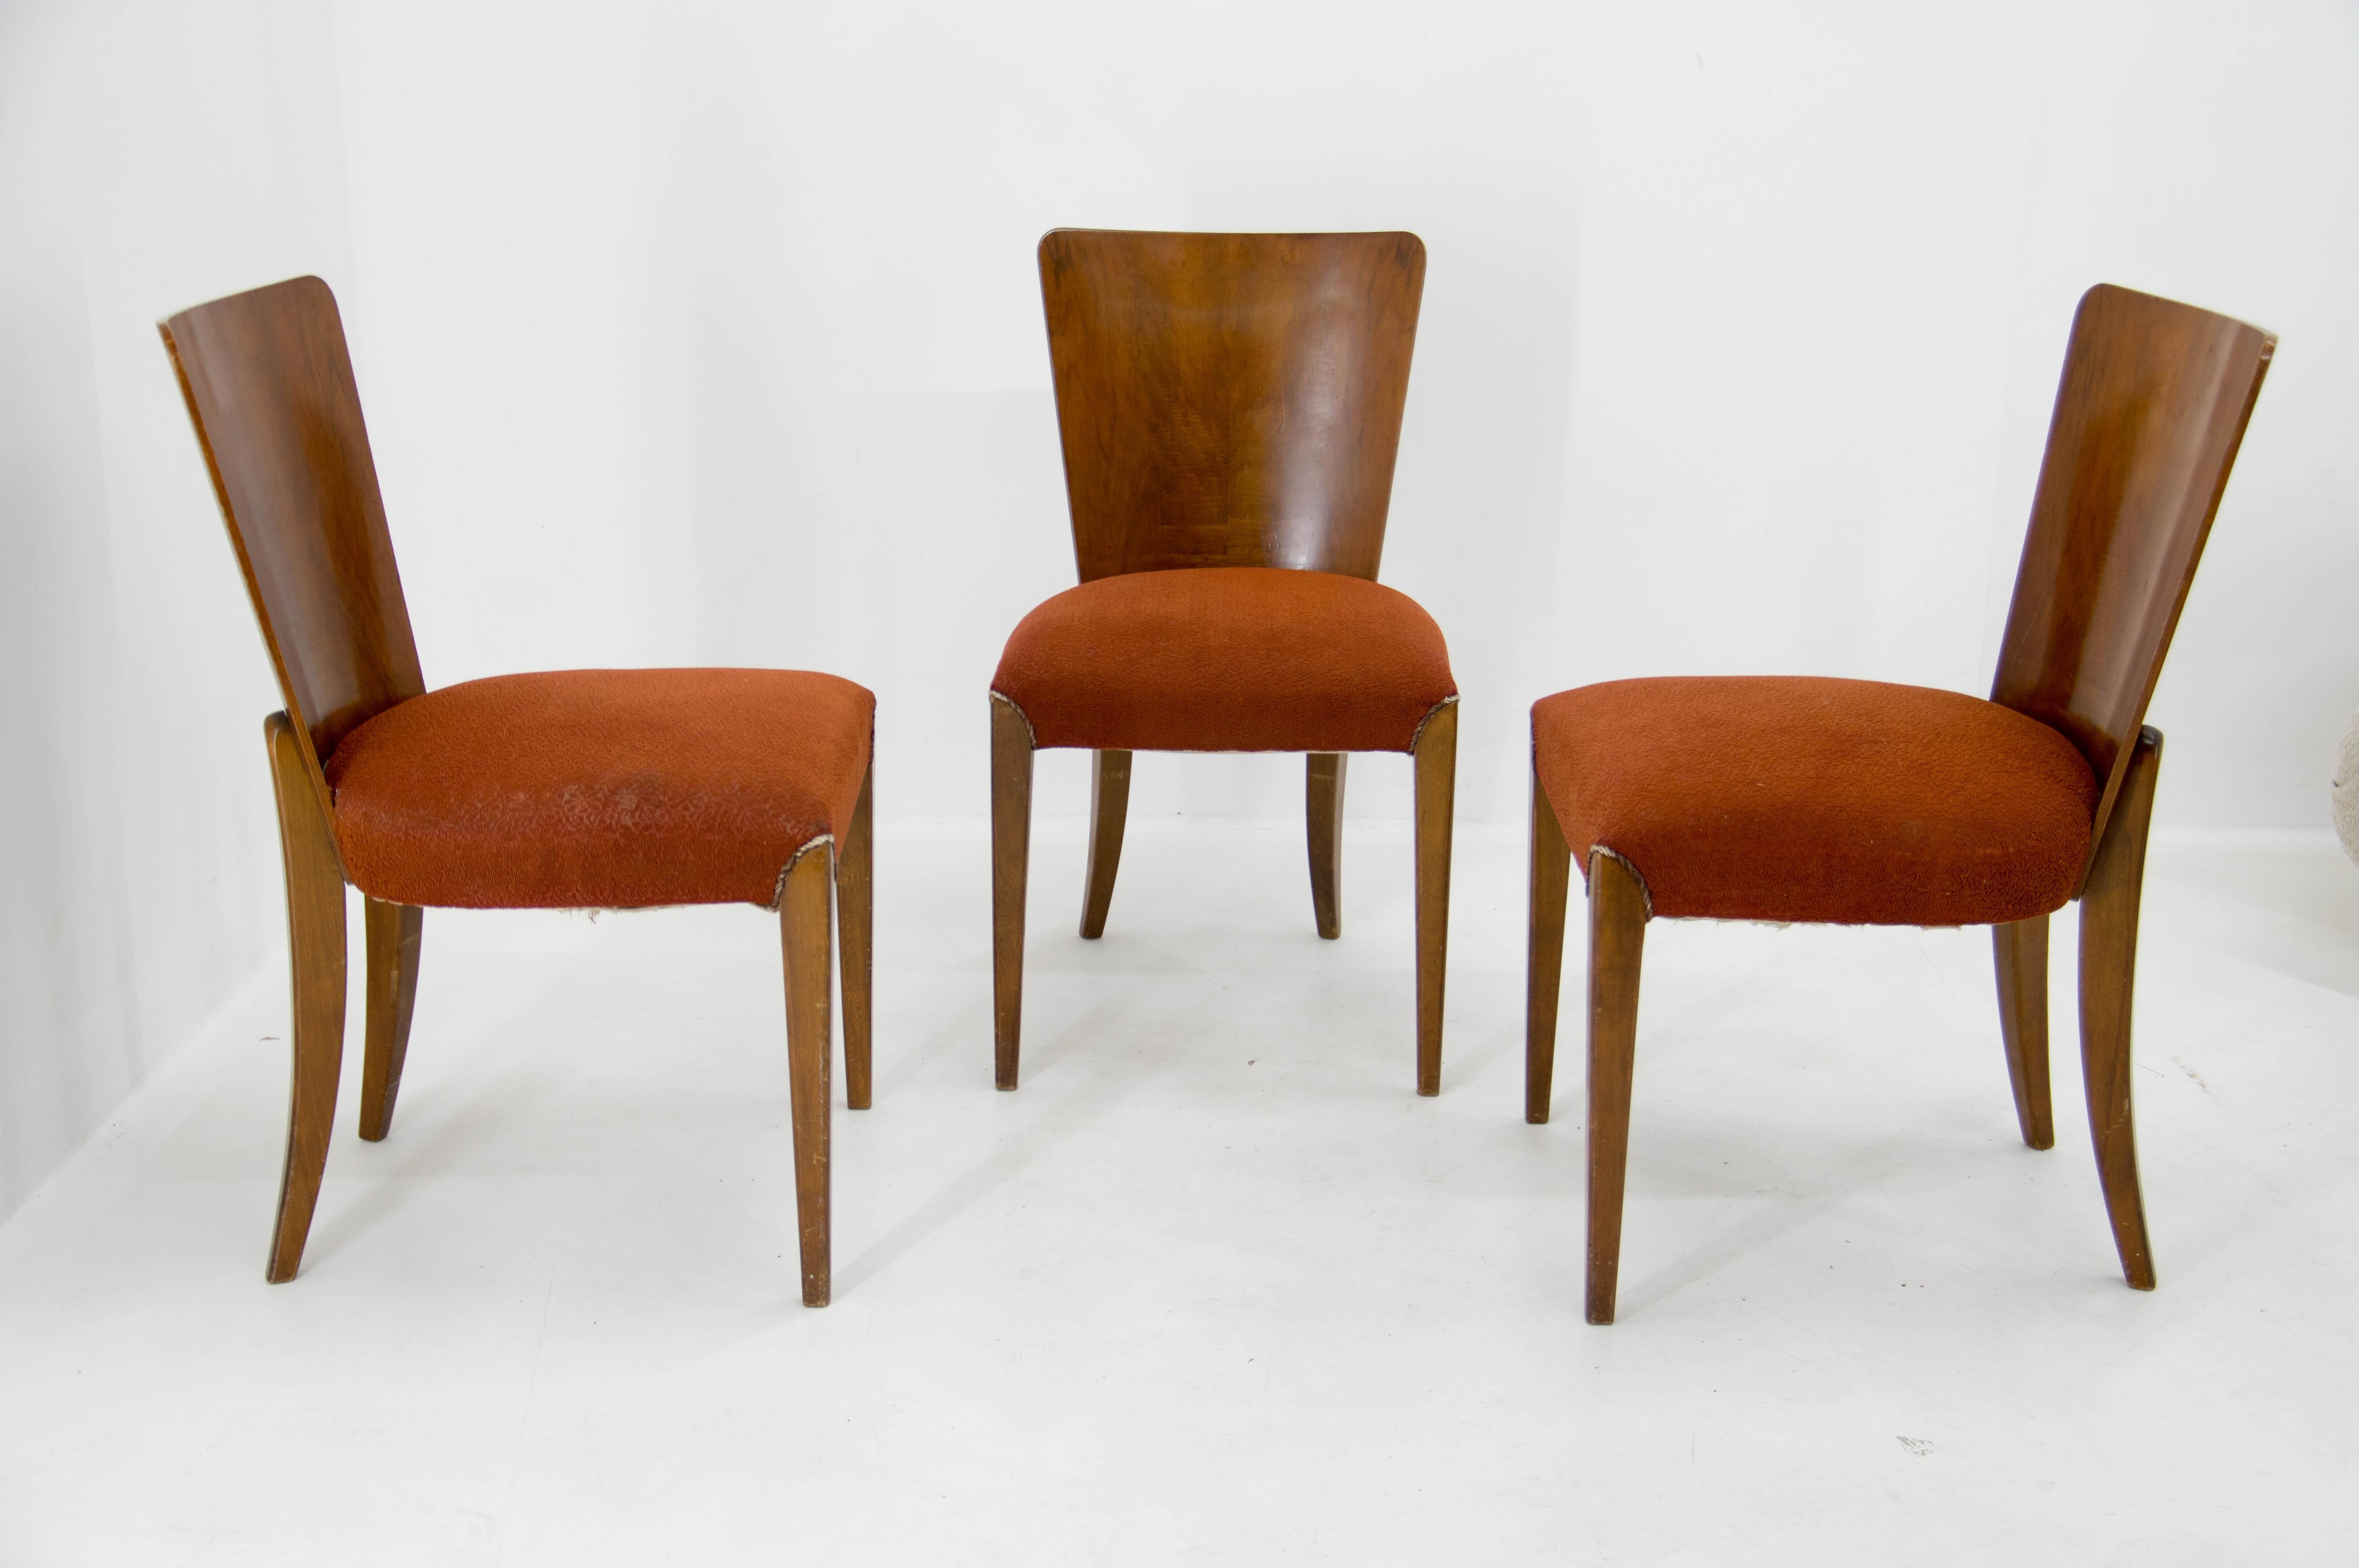 Set of three dining chairs, catalog number H-214, designed by Jindrich Halabala in the 1930s, manufactured in ÚP Závody in the 1950s. It features walnut veneer and original upholstery. The chairs are in good original condition. Upholstery has minor